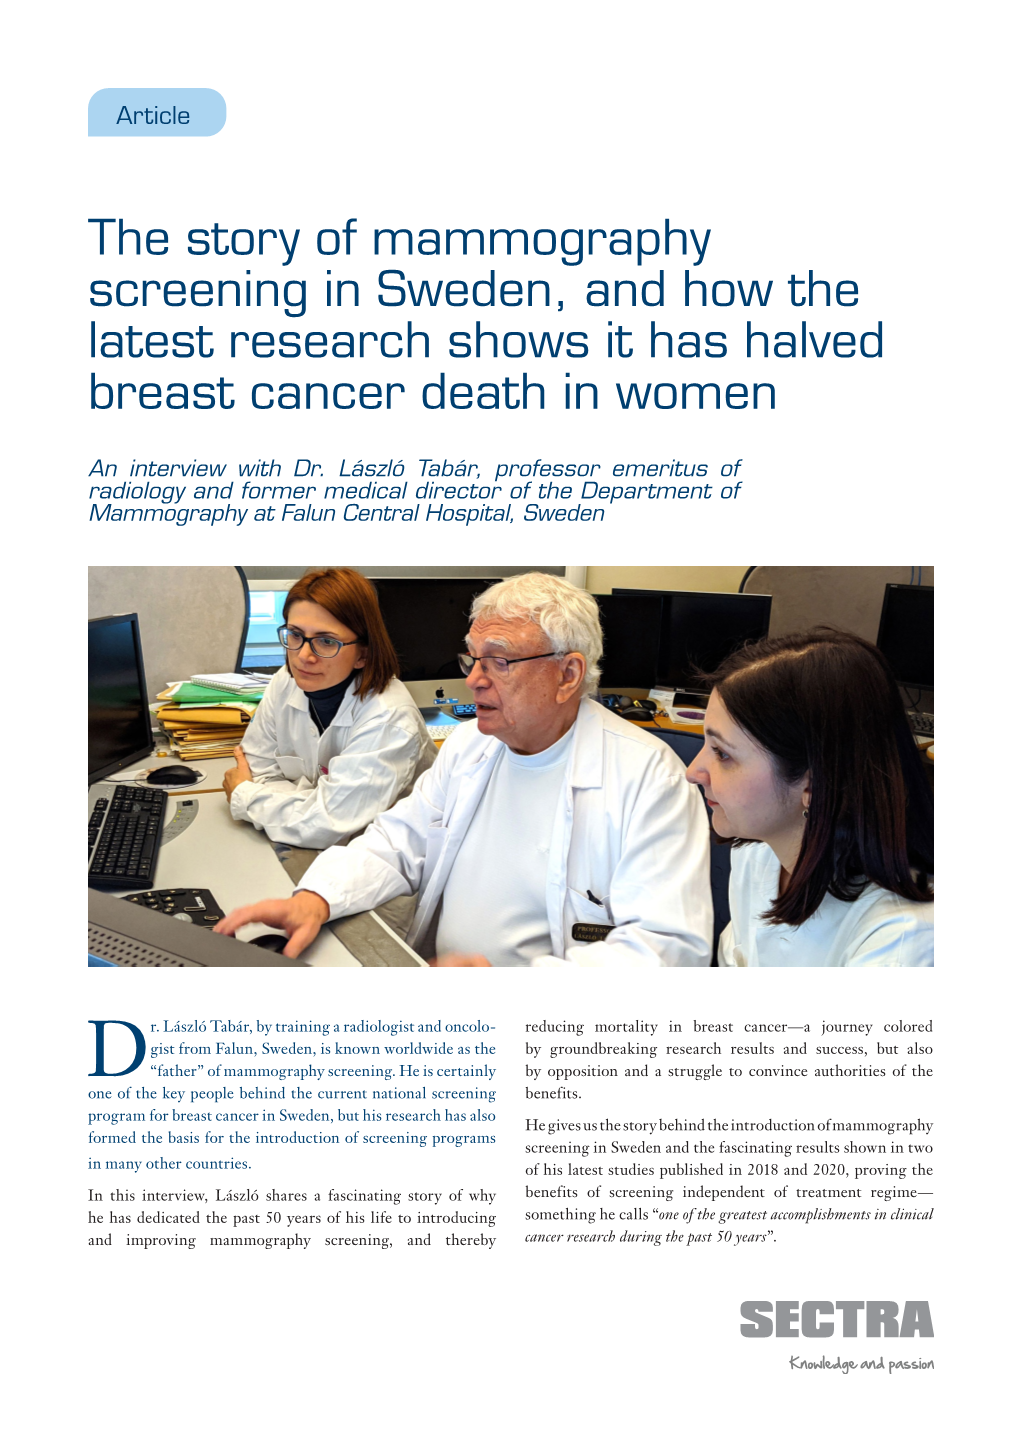 The Story of Mammography Screening in Sweden, and How the Latest Research Shows It Has Halved Breast Cancer Death in Women